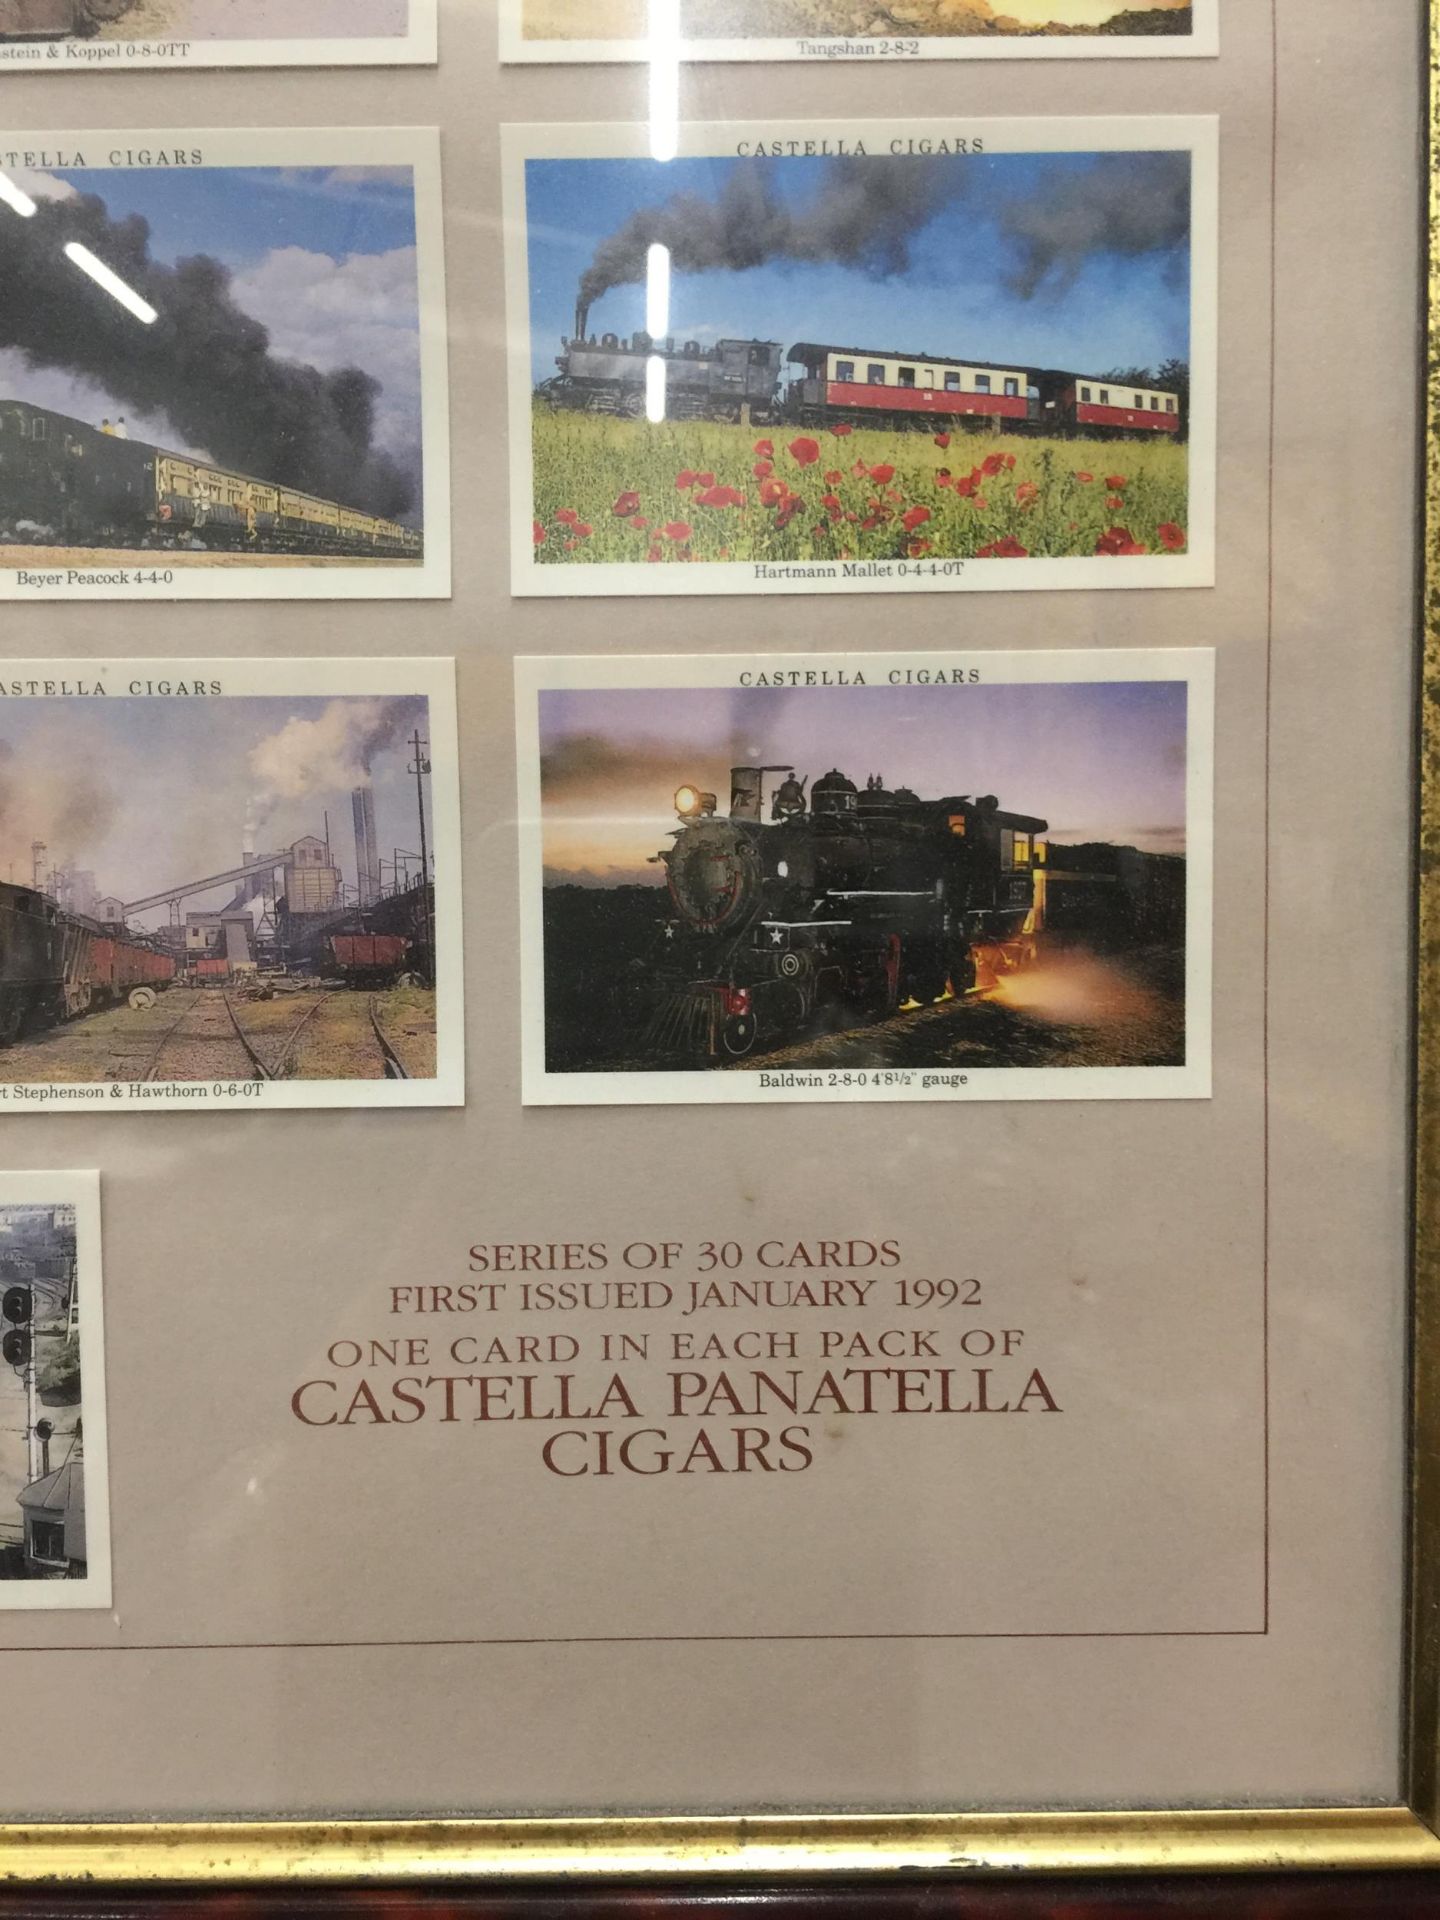 A FRAMED CASTELLA CIGARS STEAM ENGINE PICTURE CARD MONTAGE - Image 2 of 4